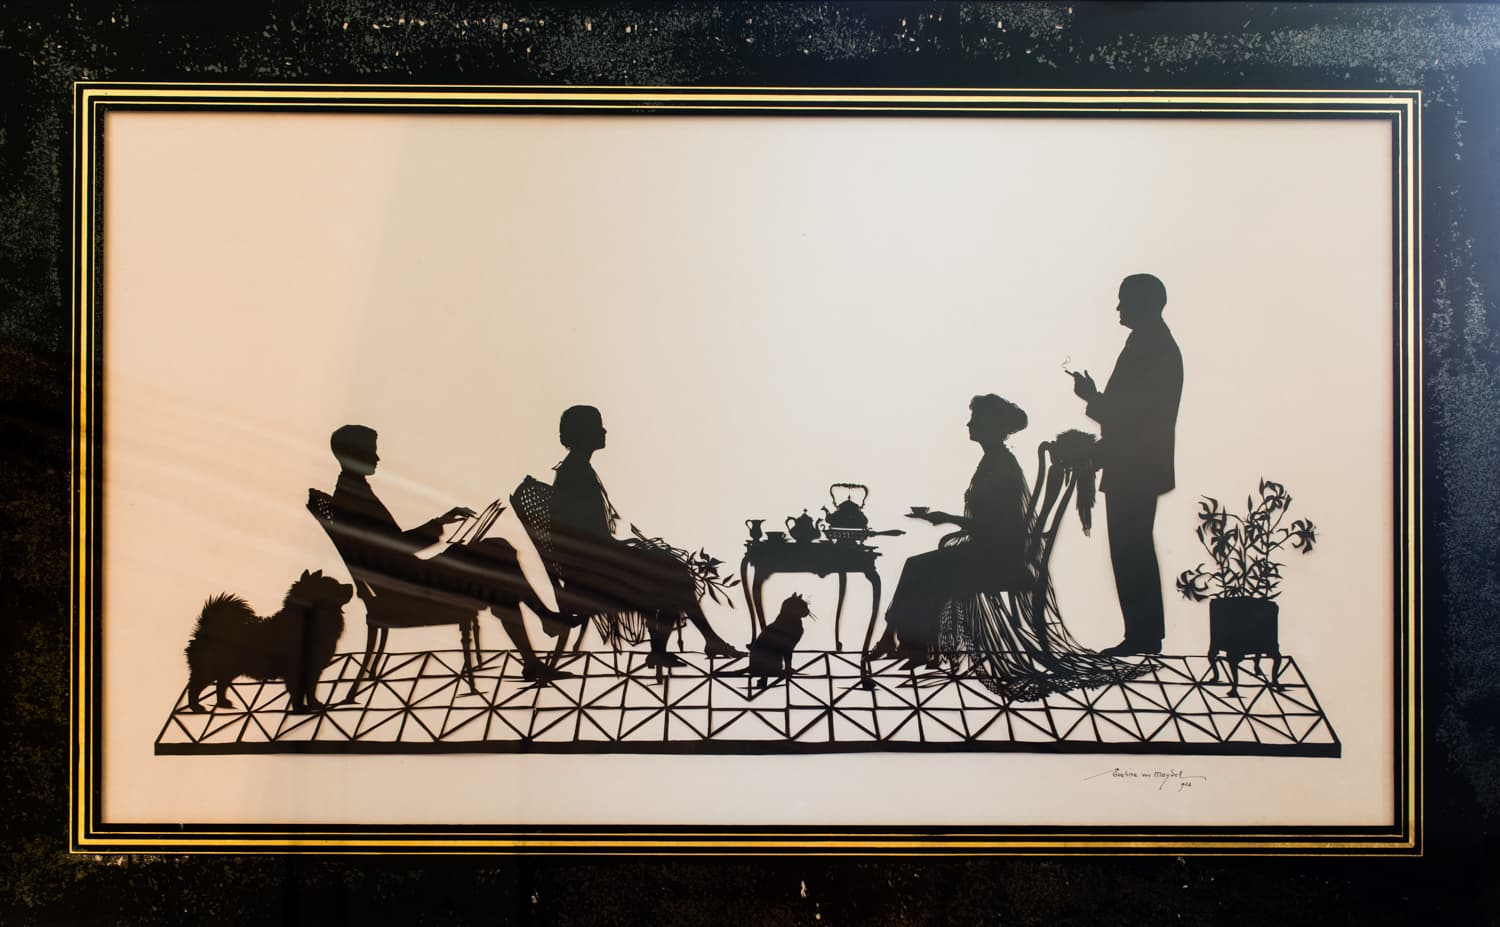 Interior details of wall decor featuring the Crane Family in Silhouette at the Great House of the Crane Estate